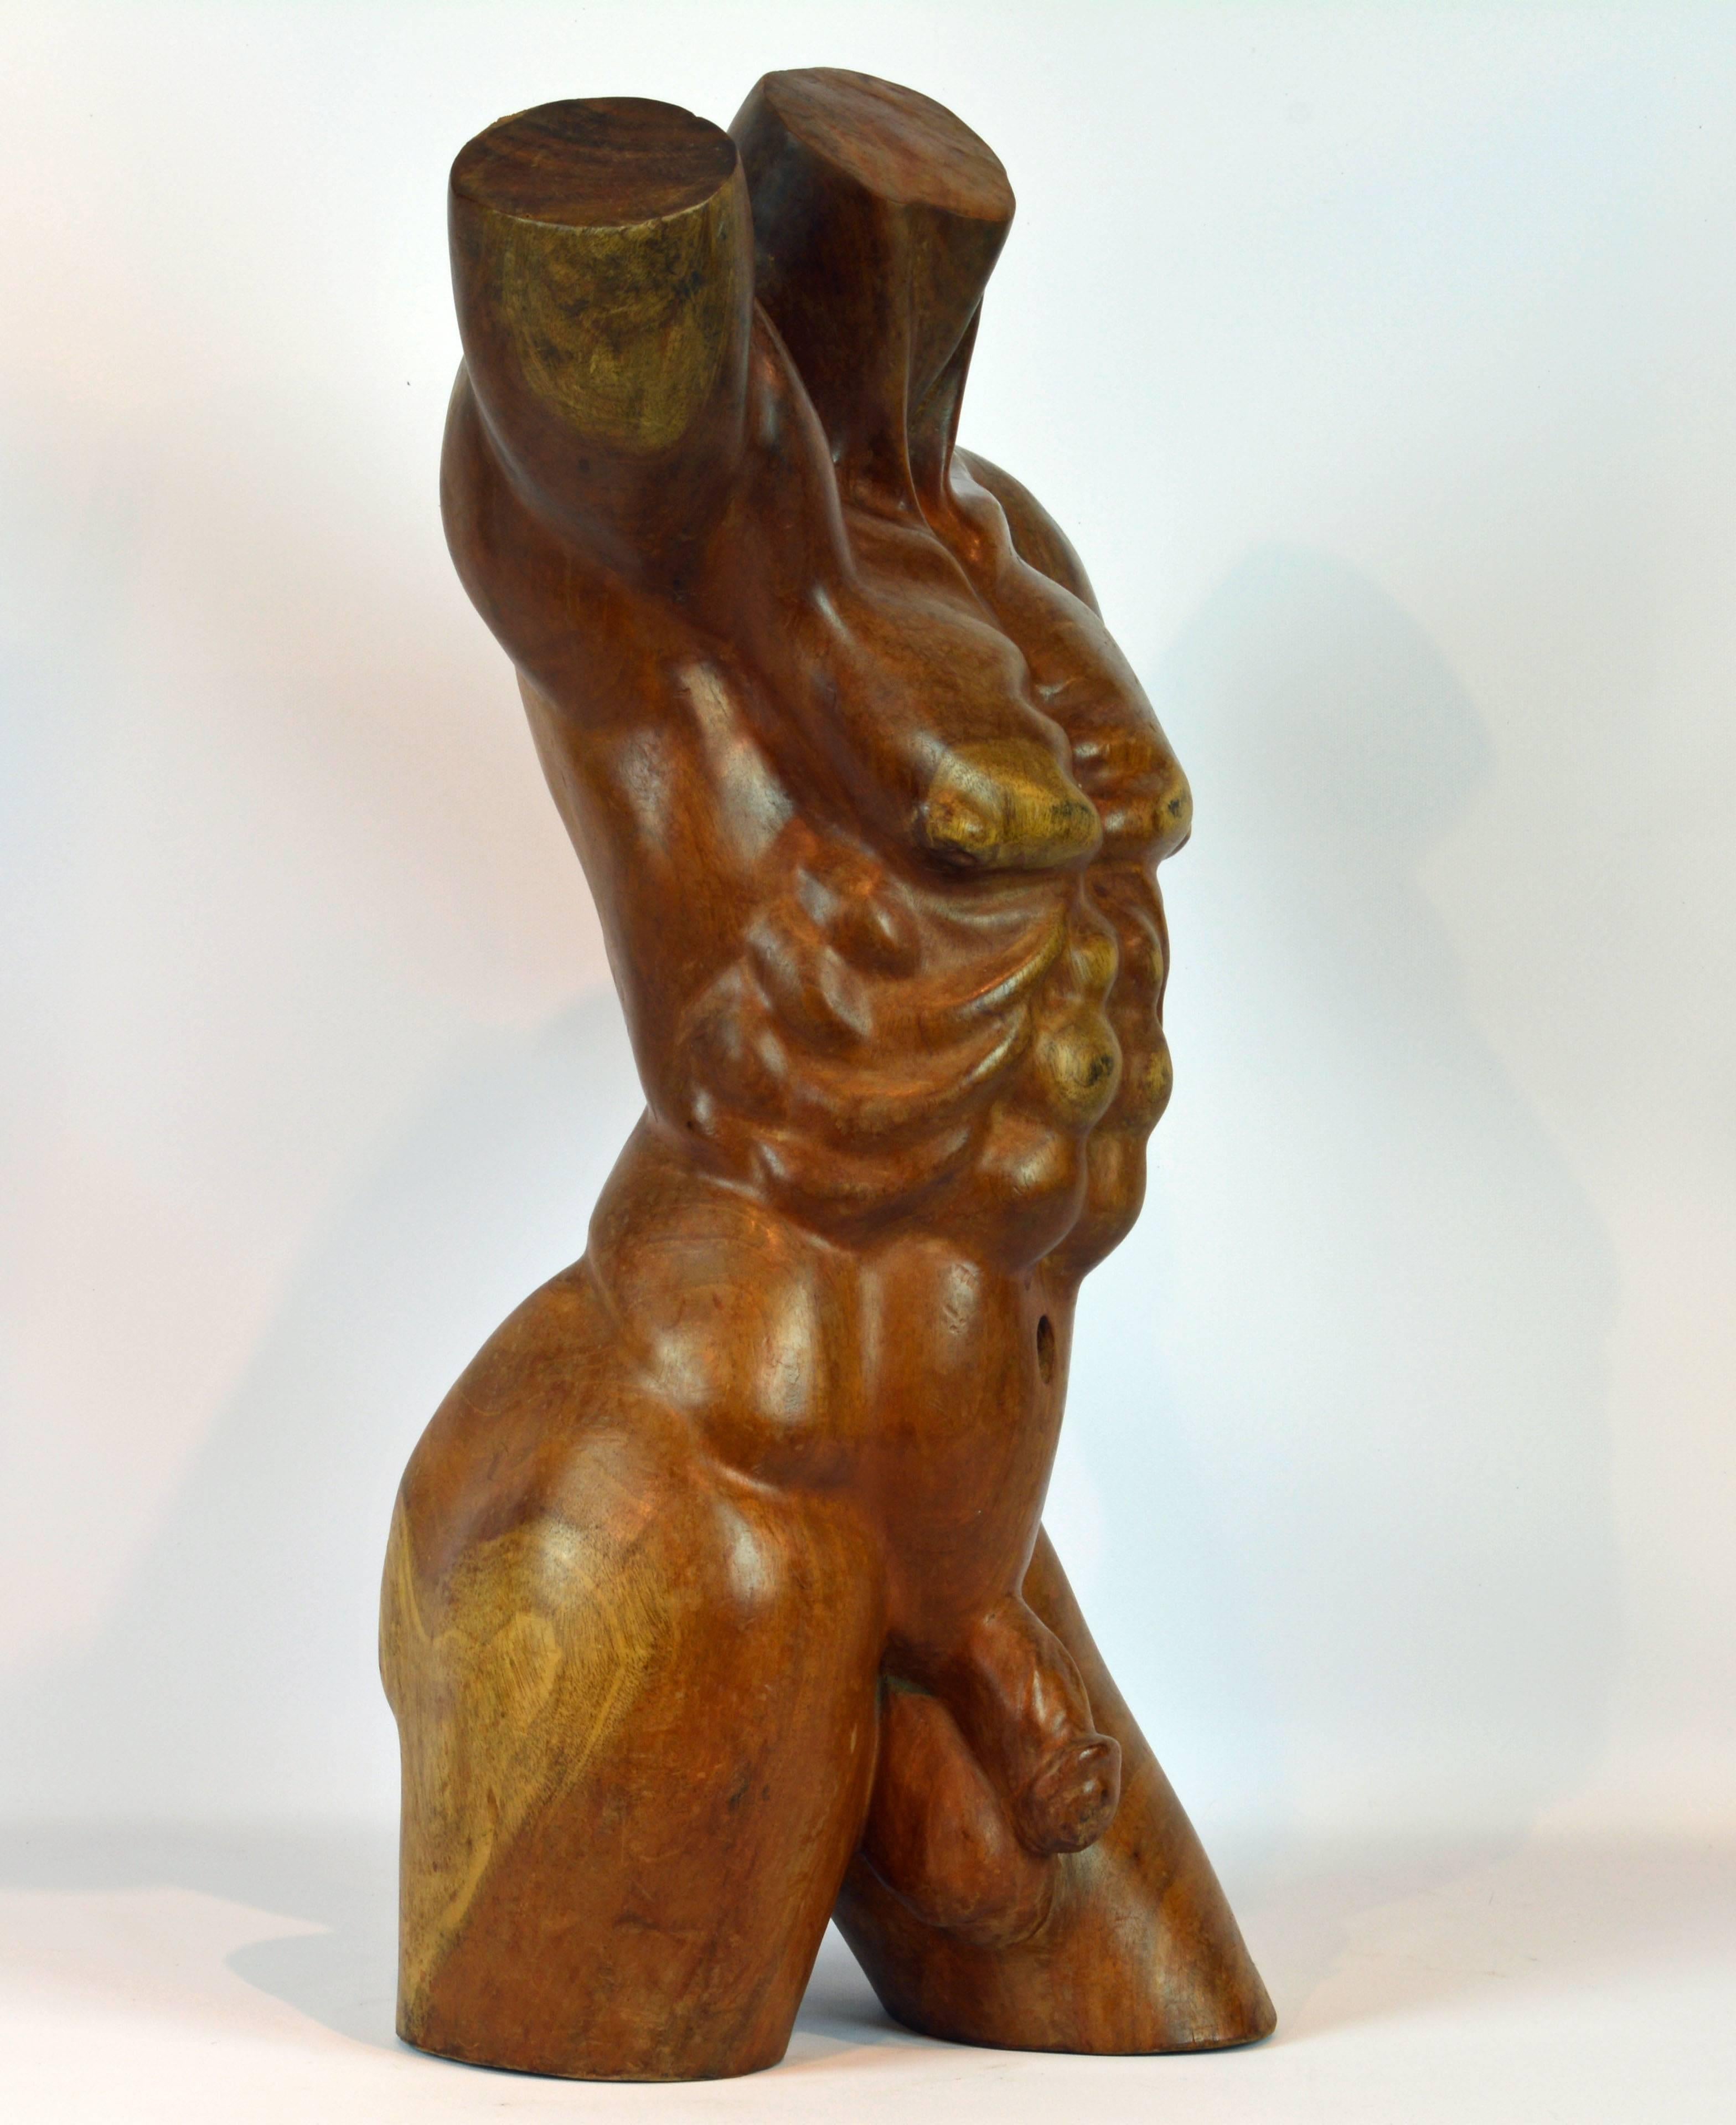 Standing more than 25 inches tall this male torso is impressive. Not totally naturalistic this sculpture has Expressionist features in the modeling of body details making it a striking piece of art. It is carved in a beautifully grained hardwood and